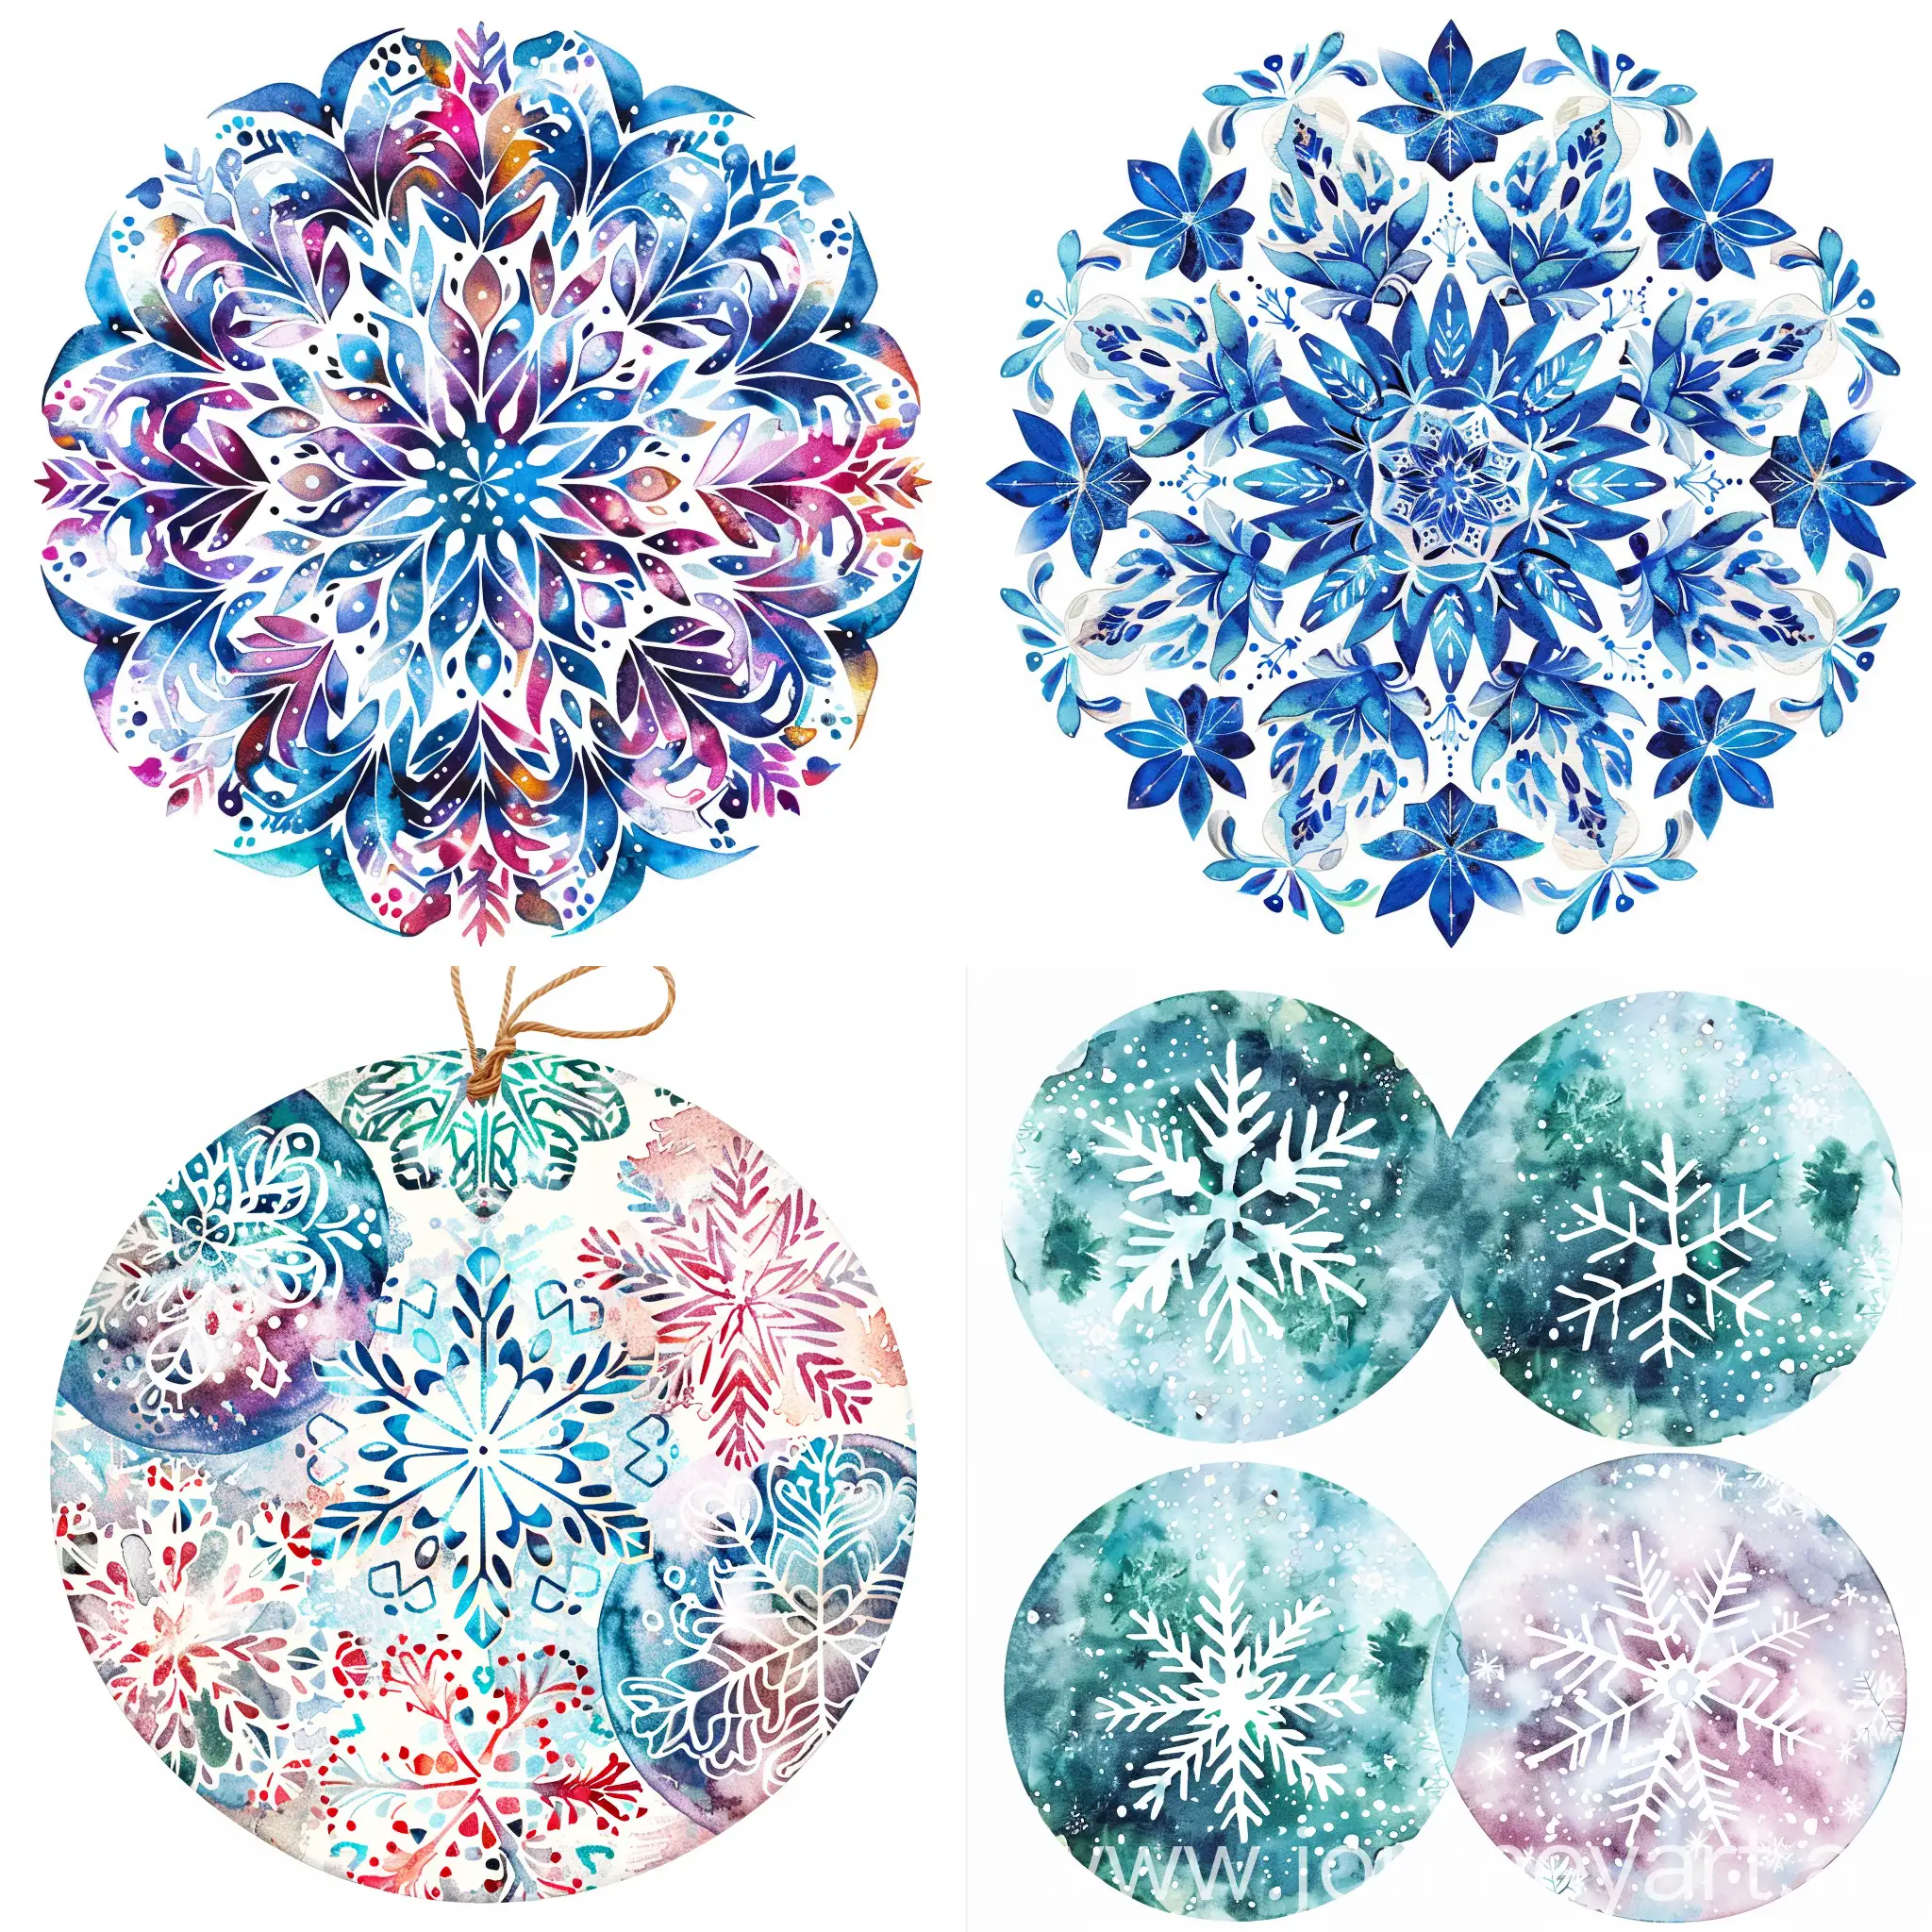  symmetrical round ornaments, ornament theme is winter with snowflakes, on a white background, vector style, watercolor, decorative, flat drawing